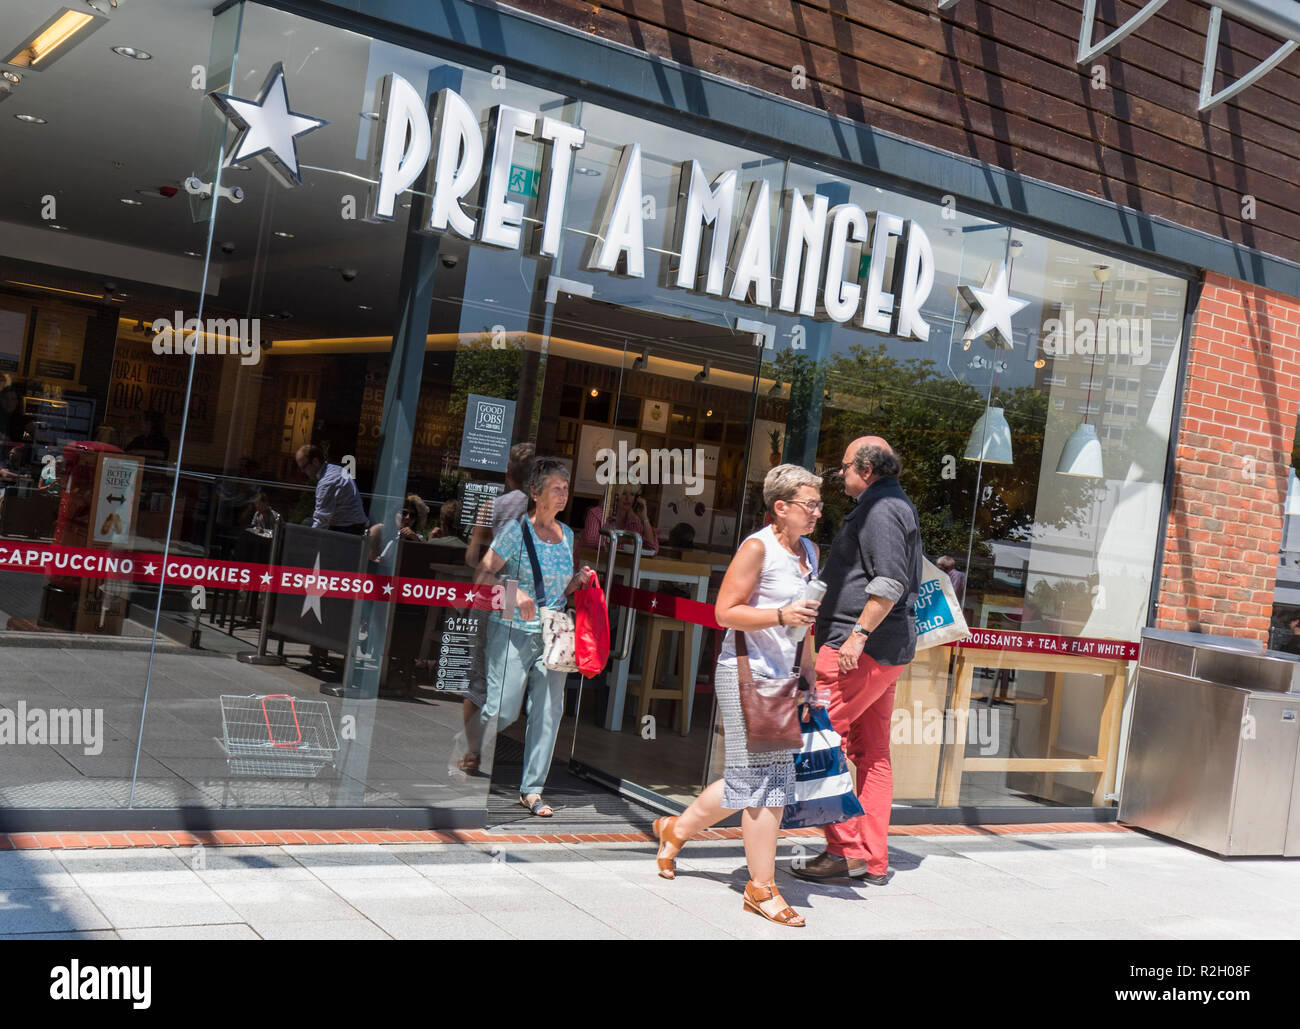 People walking in and out of the front entrance of a Pret A Manger cafe in Gunwharf Quays, Portsmouth, Hampshire. England, UK. Stock Photo